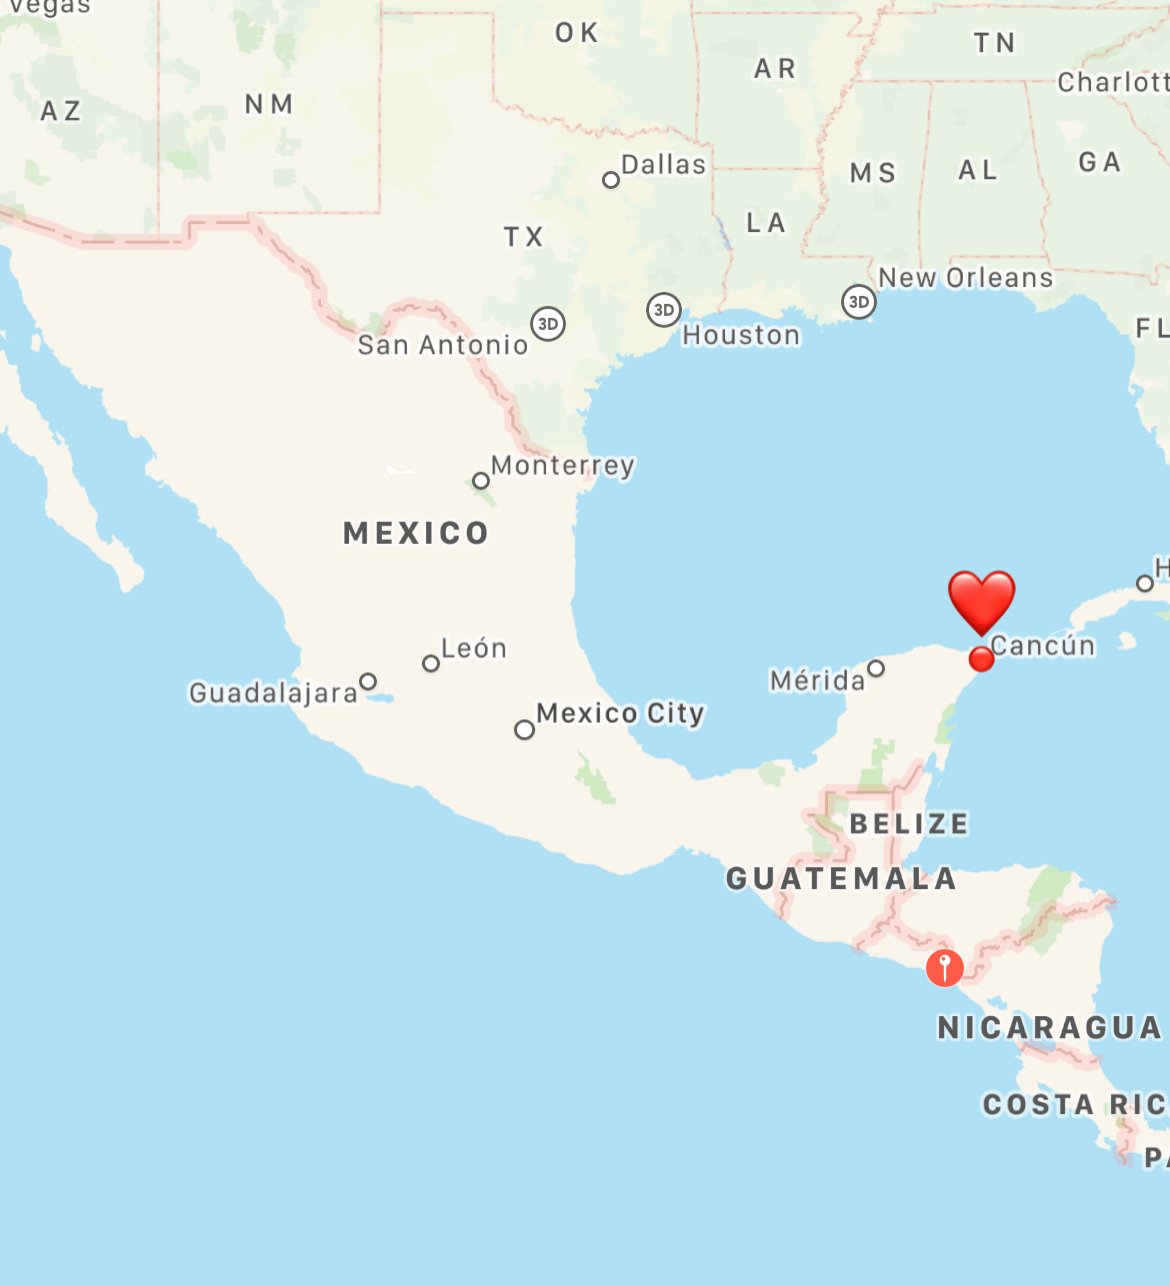 where is Cancun on the map